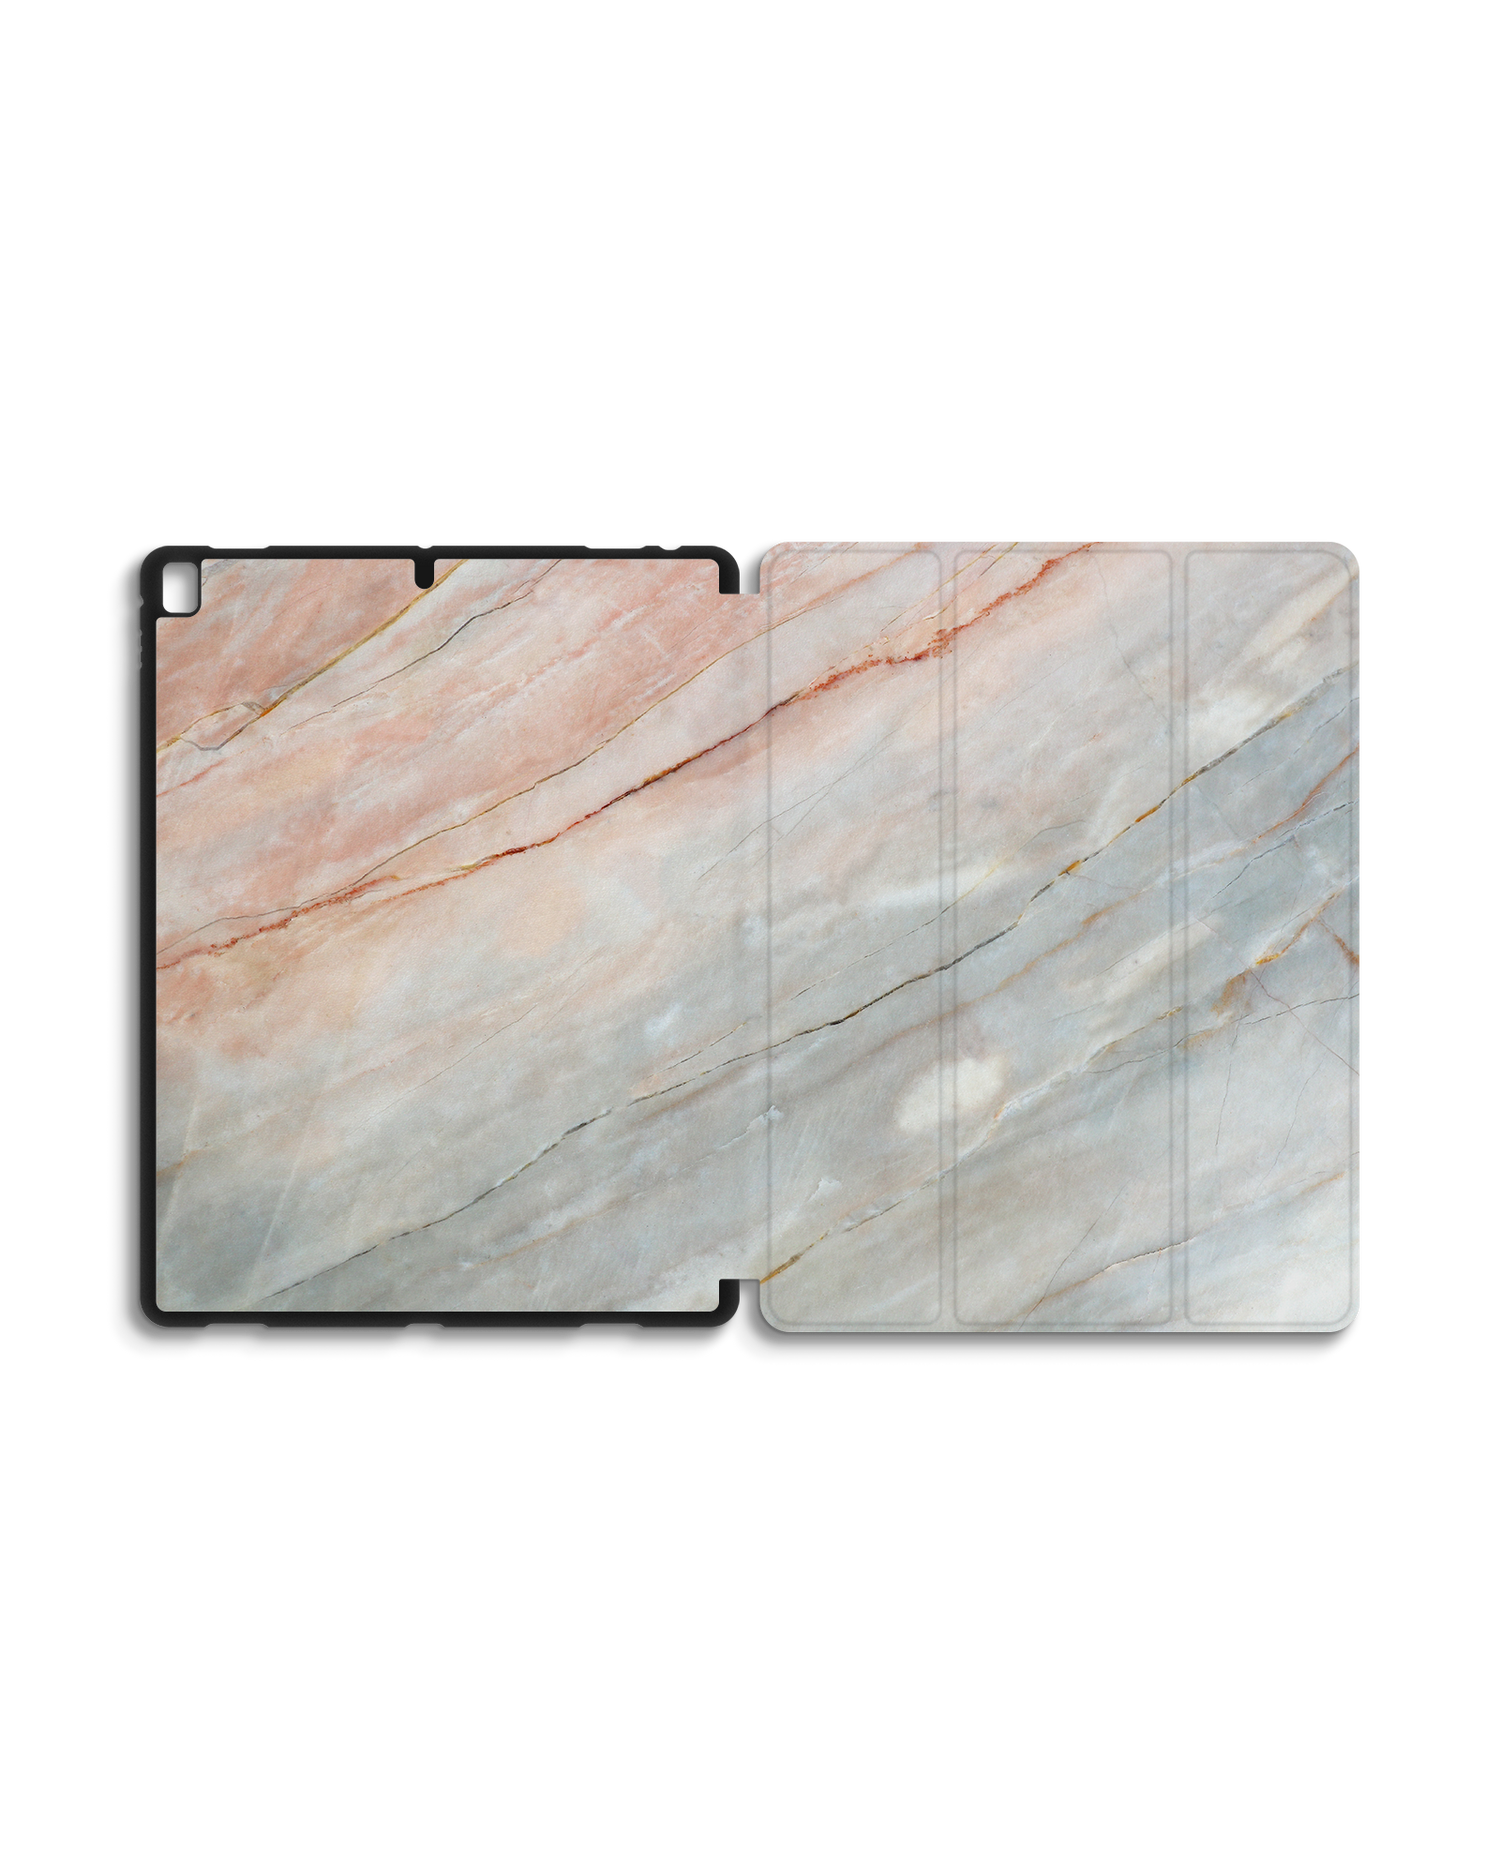 Mother of Pearl Marble iPad Case with Pencil Holder for Apple iPad Pro 2 12.9